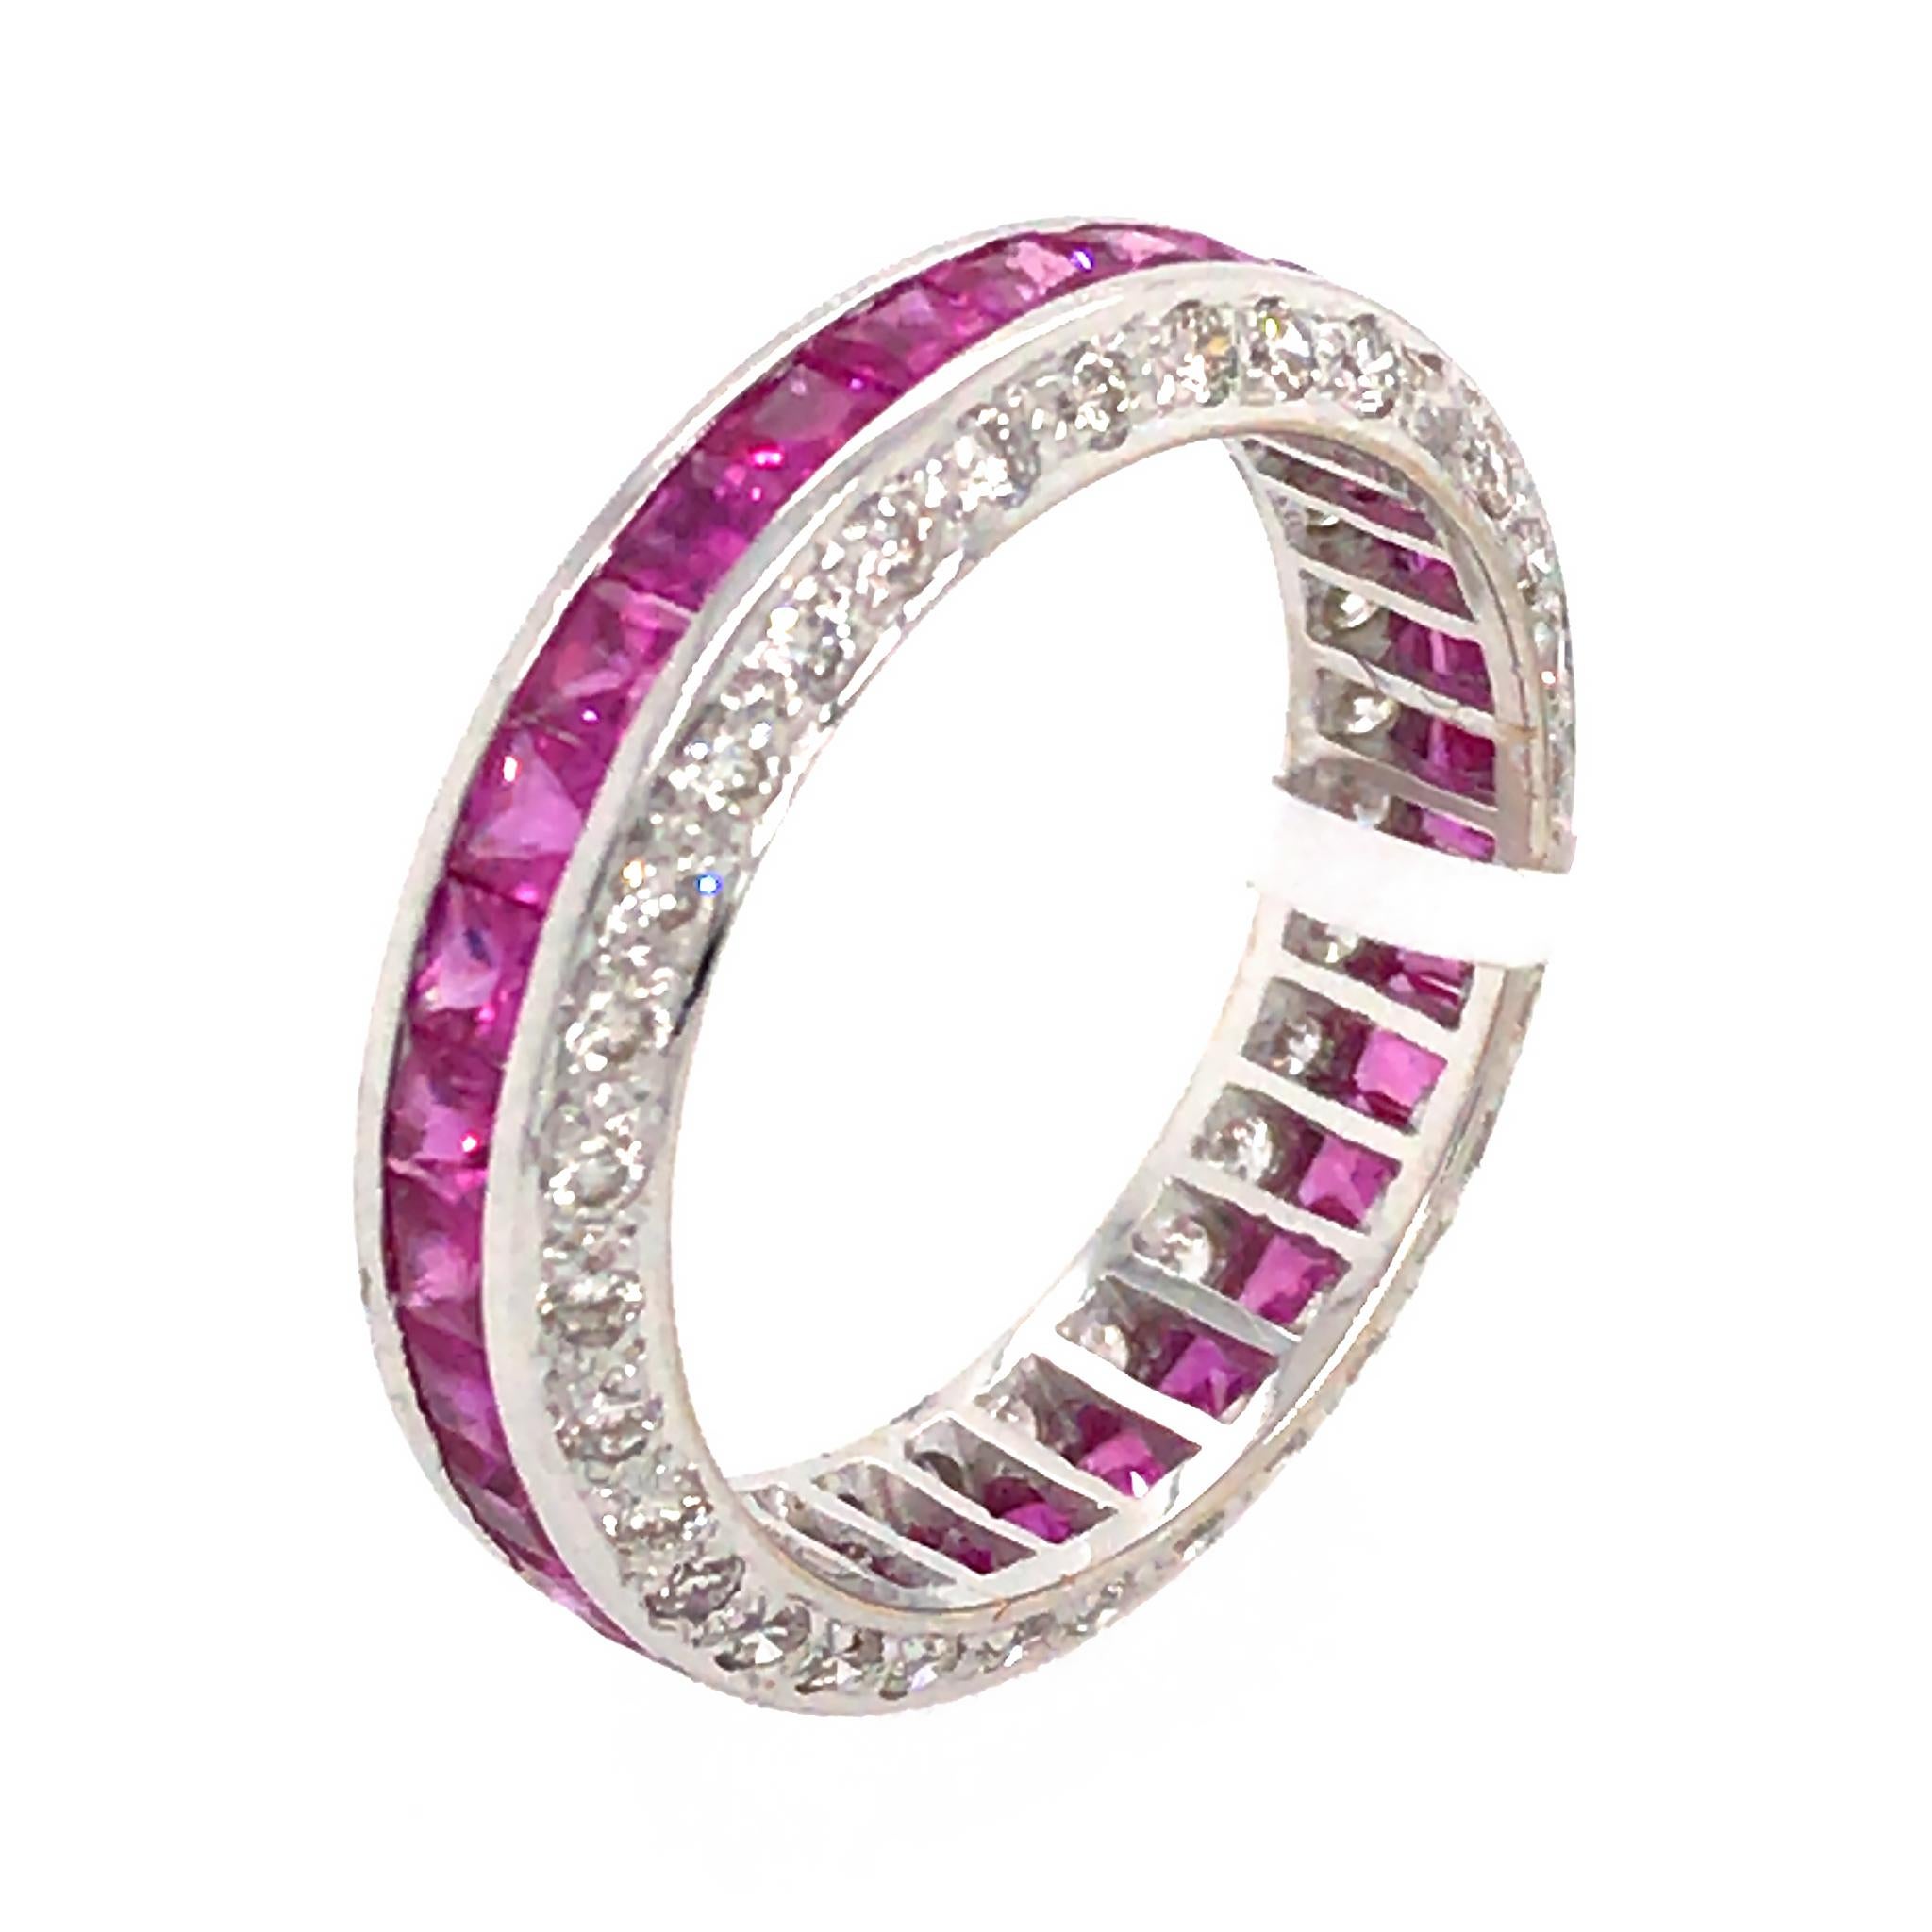 18k White Gold
Pink Sapphire: 1.98 tcw
Diamond: 0.95 ct twd
Ring Size: 7.25 
Total Weight: 3.65 grams